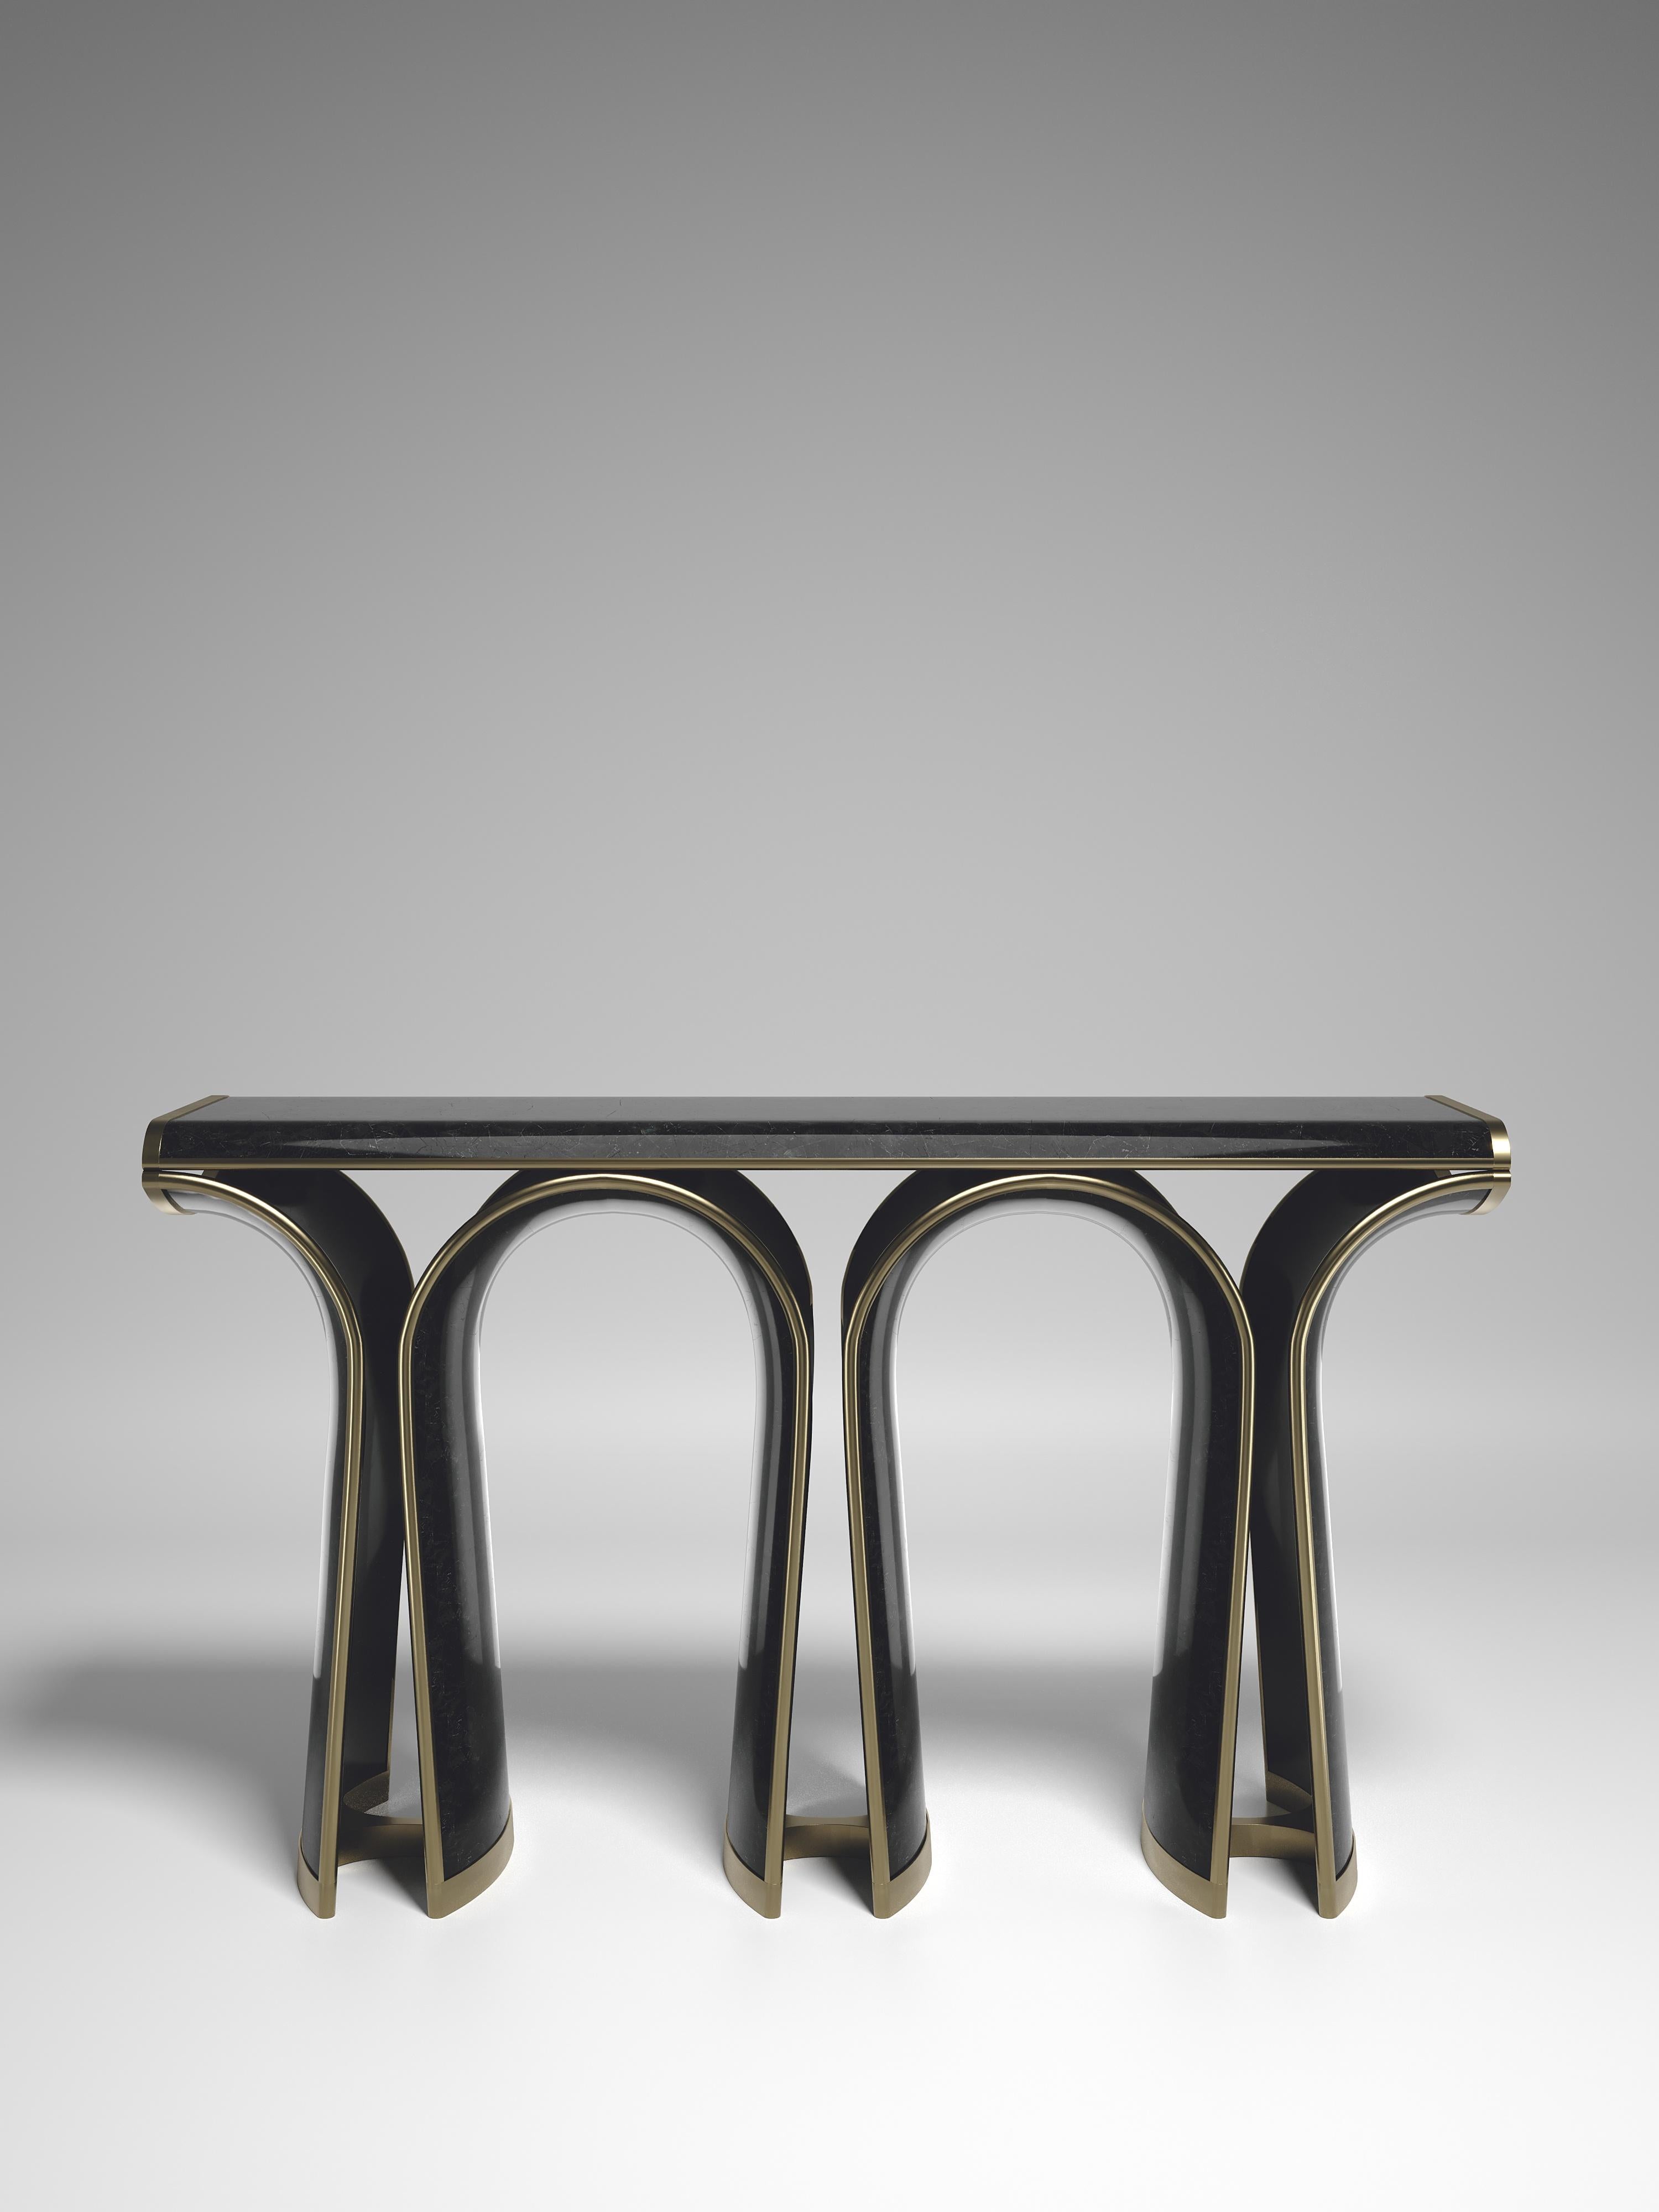 The Nymphea console by R&Y Augousti in black pen shell with bronze-patina brass details explores the brand's iconic DNA of bringing old world artisanal craft into a contemporary and utterly luxury feel. Available in other finishes. Custom